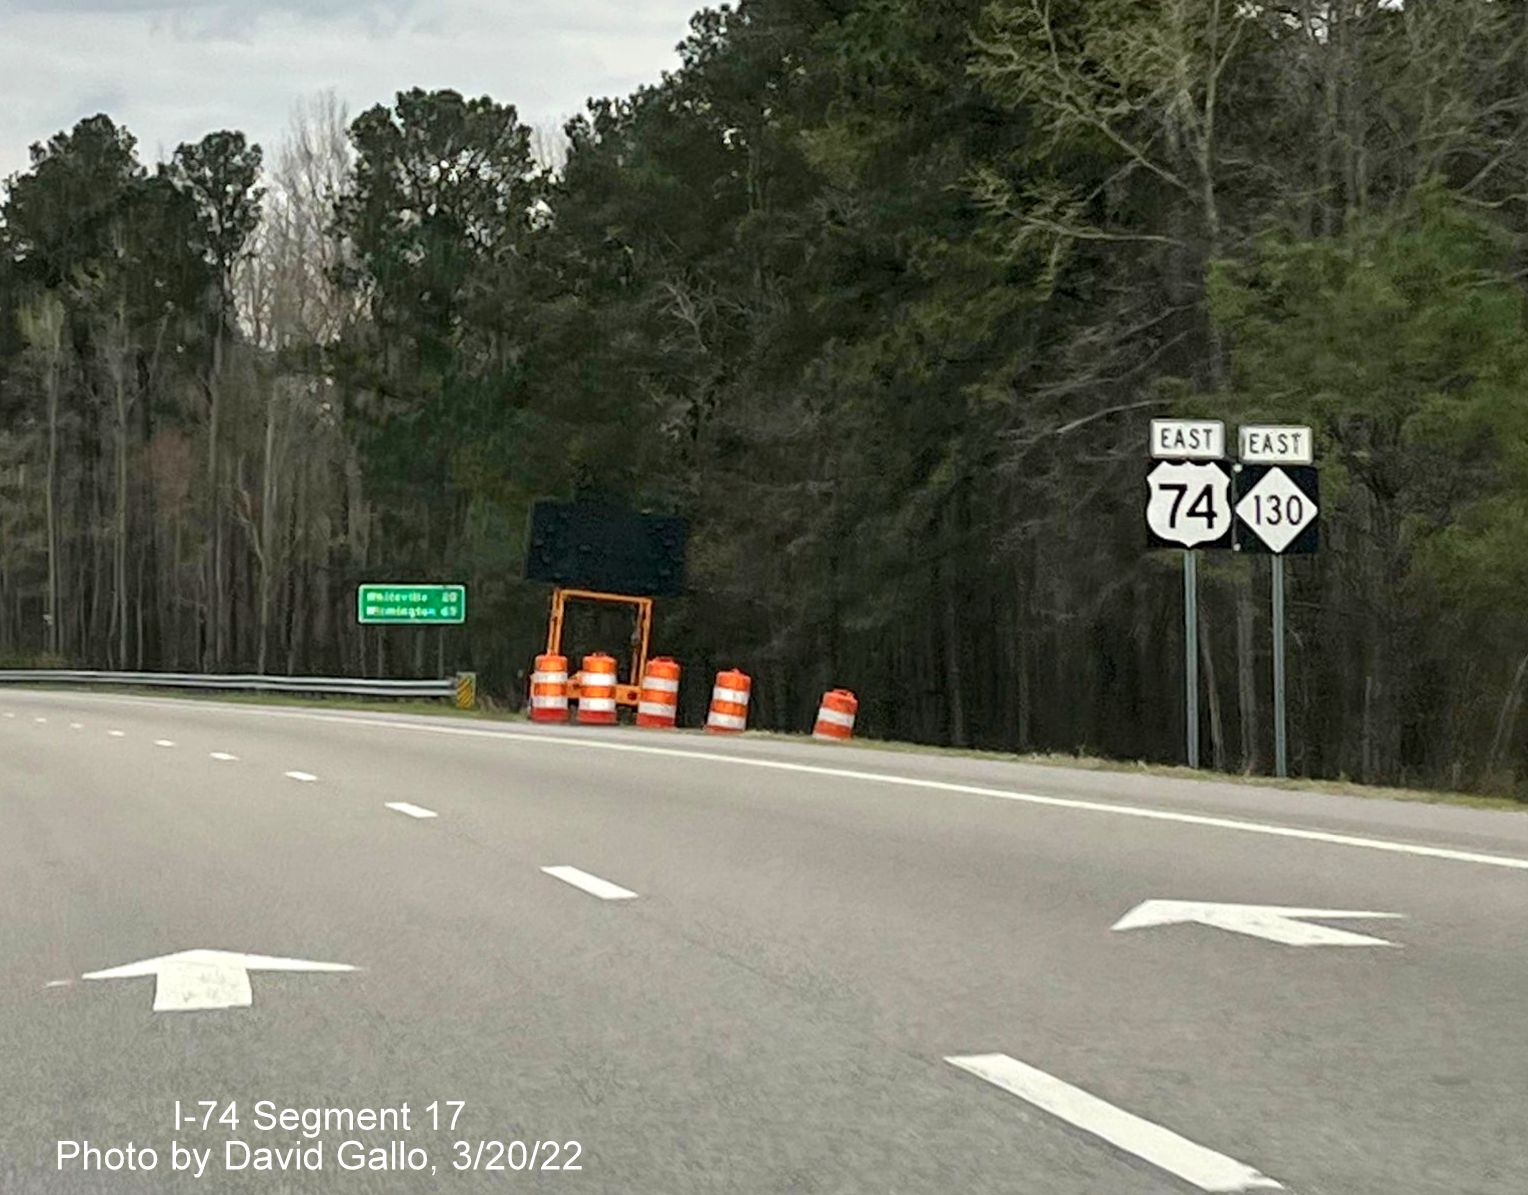 Image approaching Old Boardman Road interchange construction site on US 74 (Future I-74) East in
        Robeson County, by David Gallo, March 2022